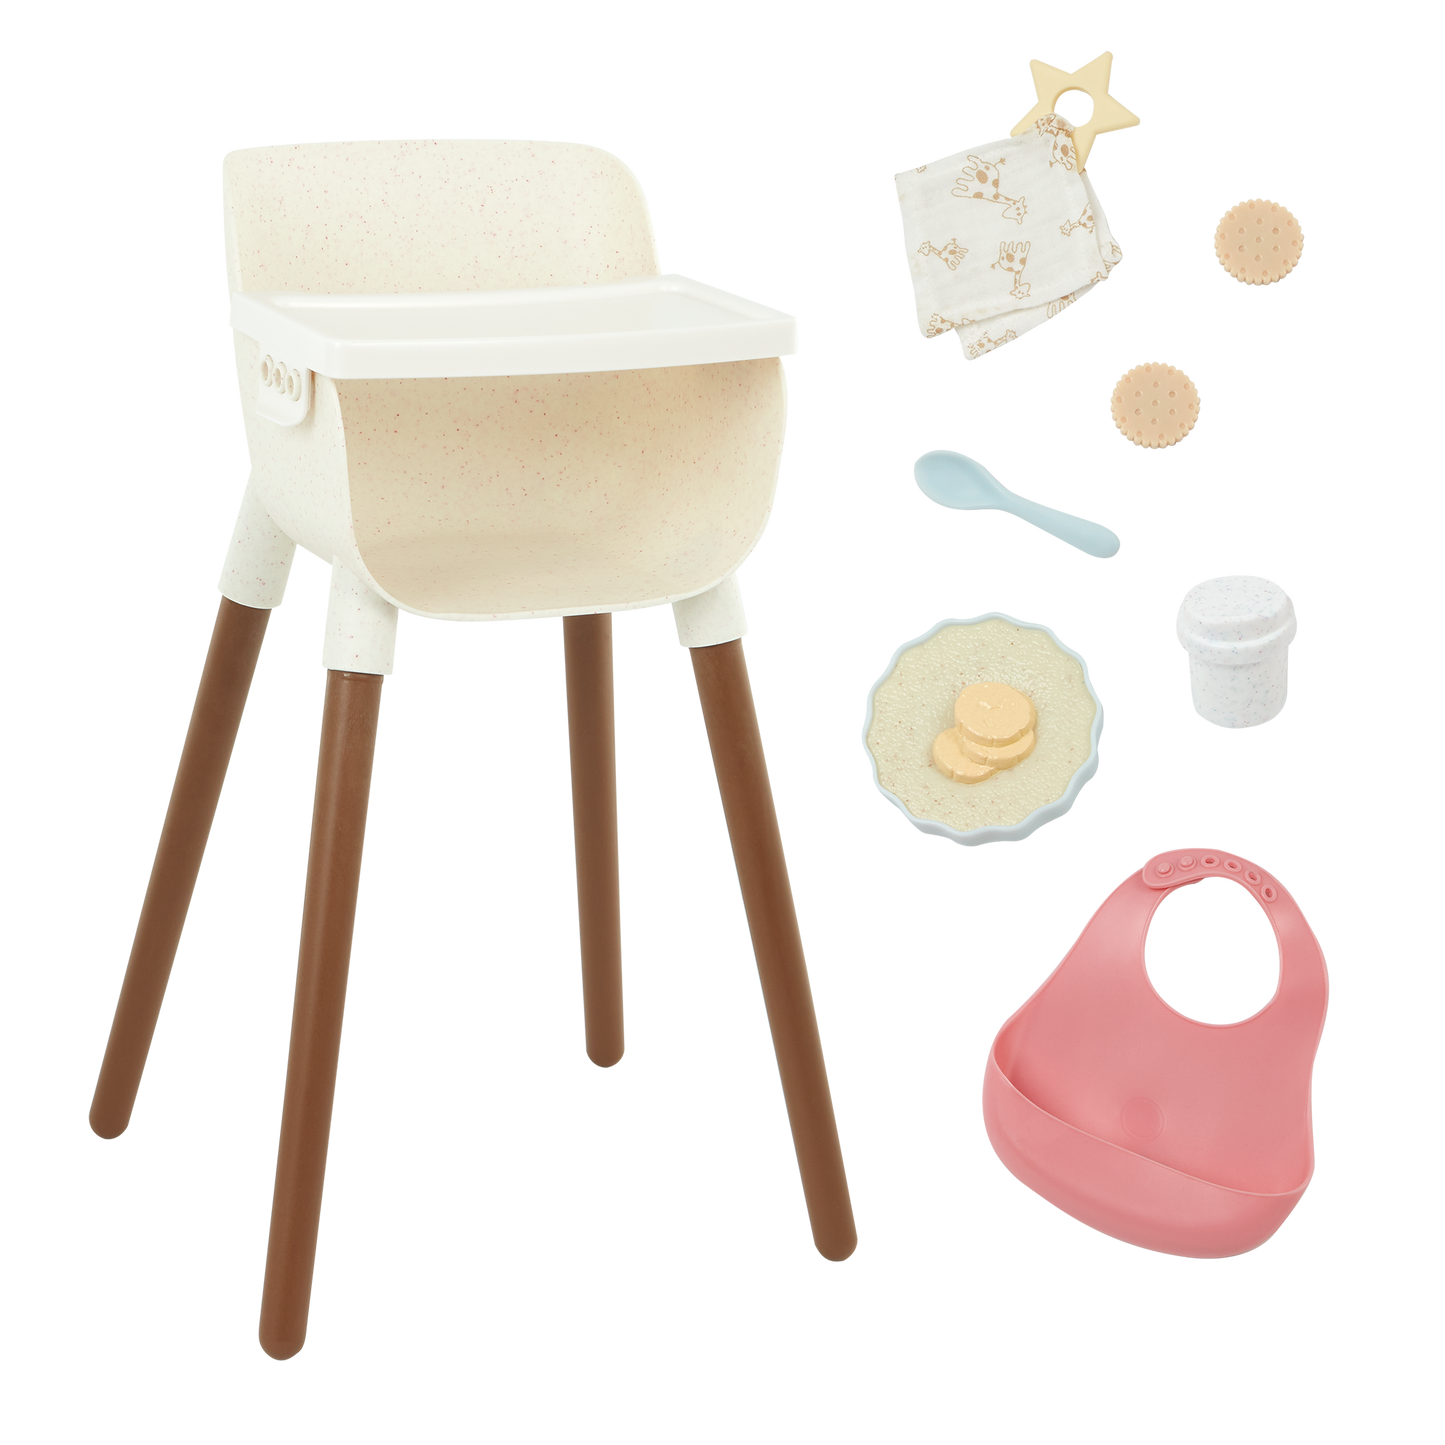 14" LULLABABY DOLL HIGH CHAIR ACCESORRY SET